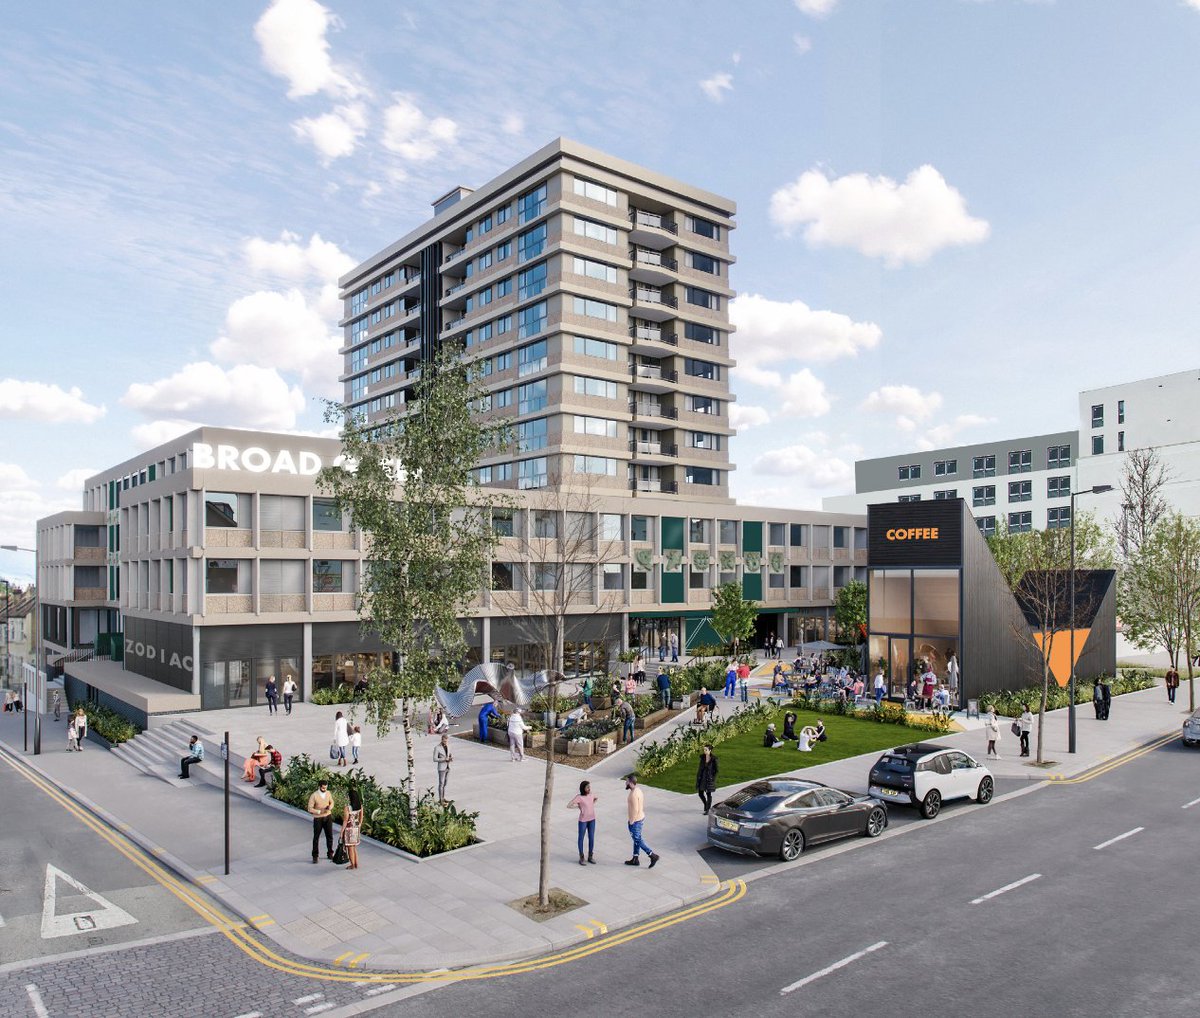 We are excited to support the pending Zodiac Court Project in Broad Green to ensure locals have somewhere safe, inspiring and well maintained. Read the planning proposal here and leave a comment of support here > publicaccess3.croydon.gov.uk/online-applica…